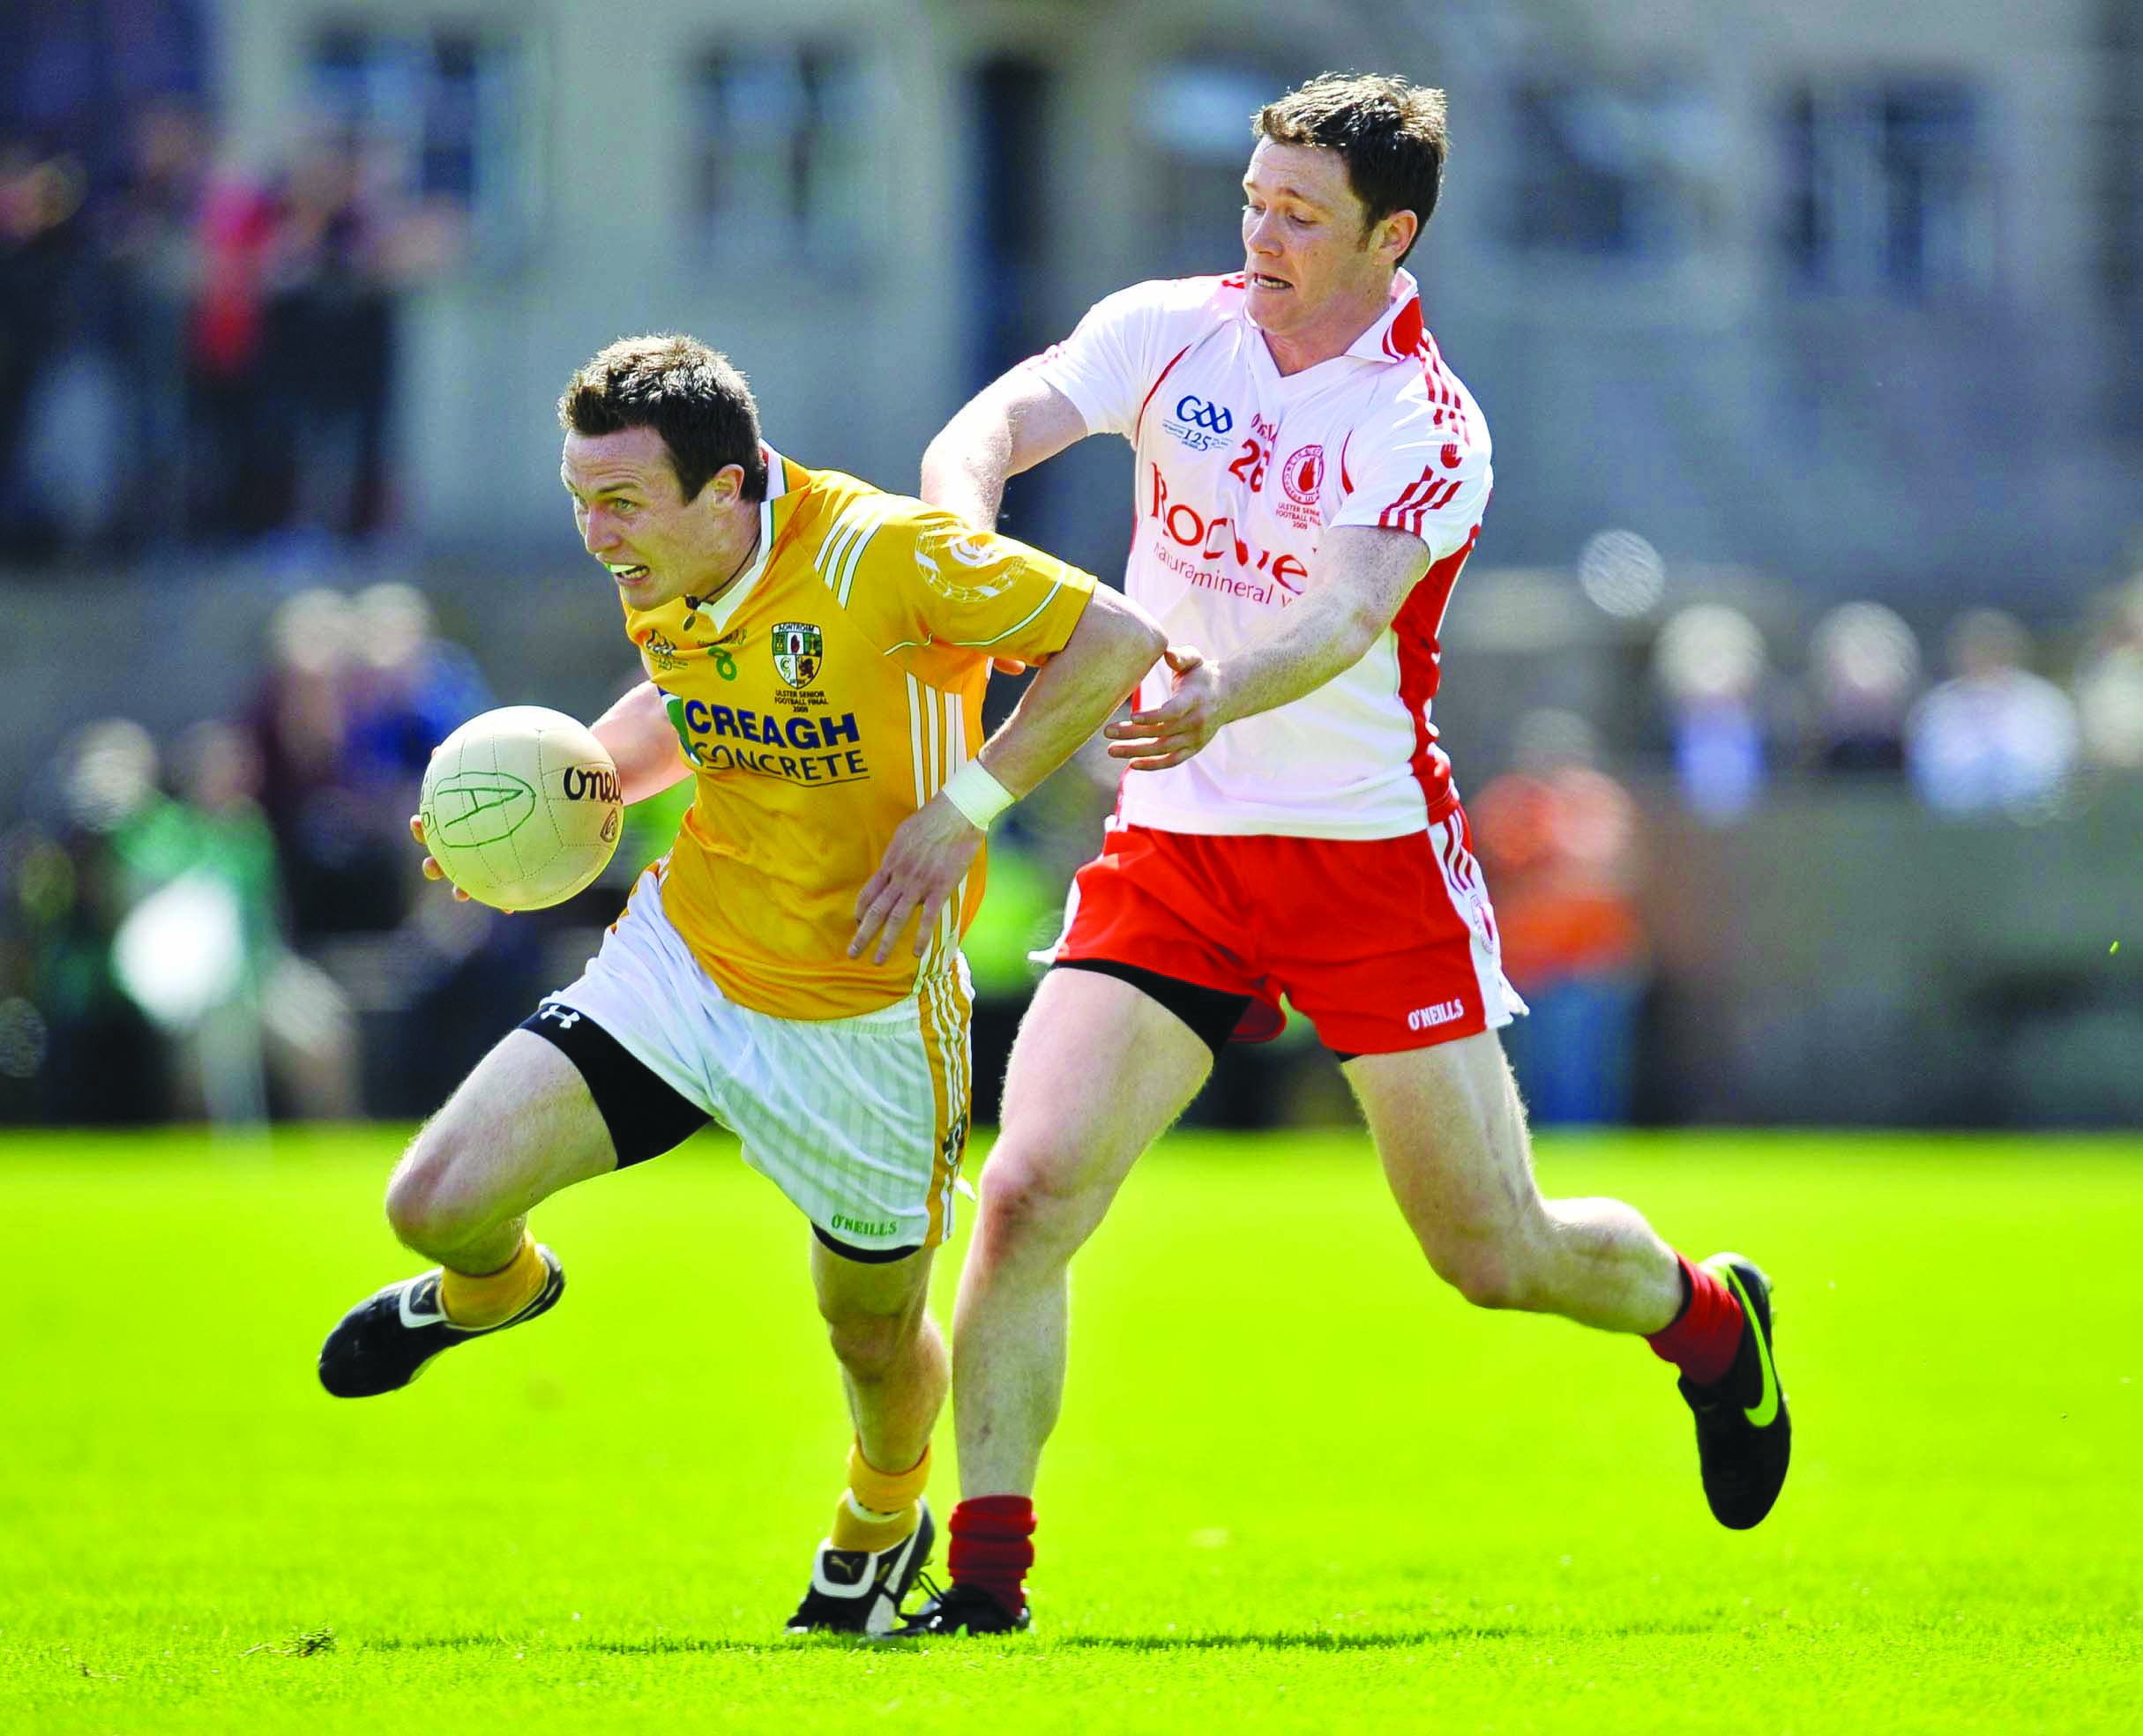 Three-time All-Ireland winner Enda McGinley, pictured challenging his brother-in-law Michael McCann during the 2009 Ulster final, takes over from Lenny Harbinson as Antrim football manager and has included former Tyrone teammate Stephen O’Neill and ex-Saf